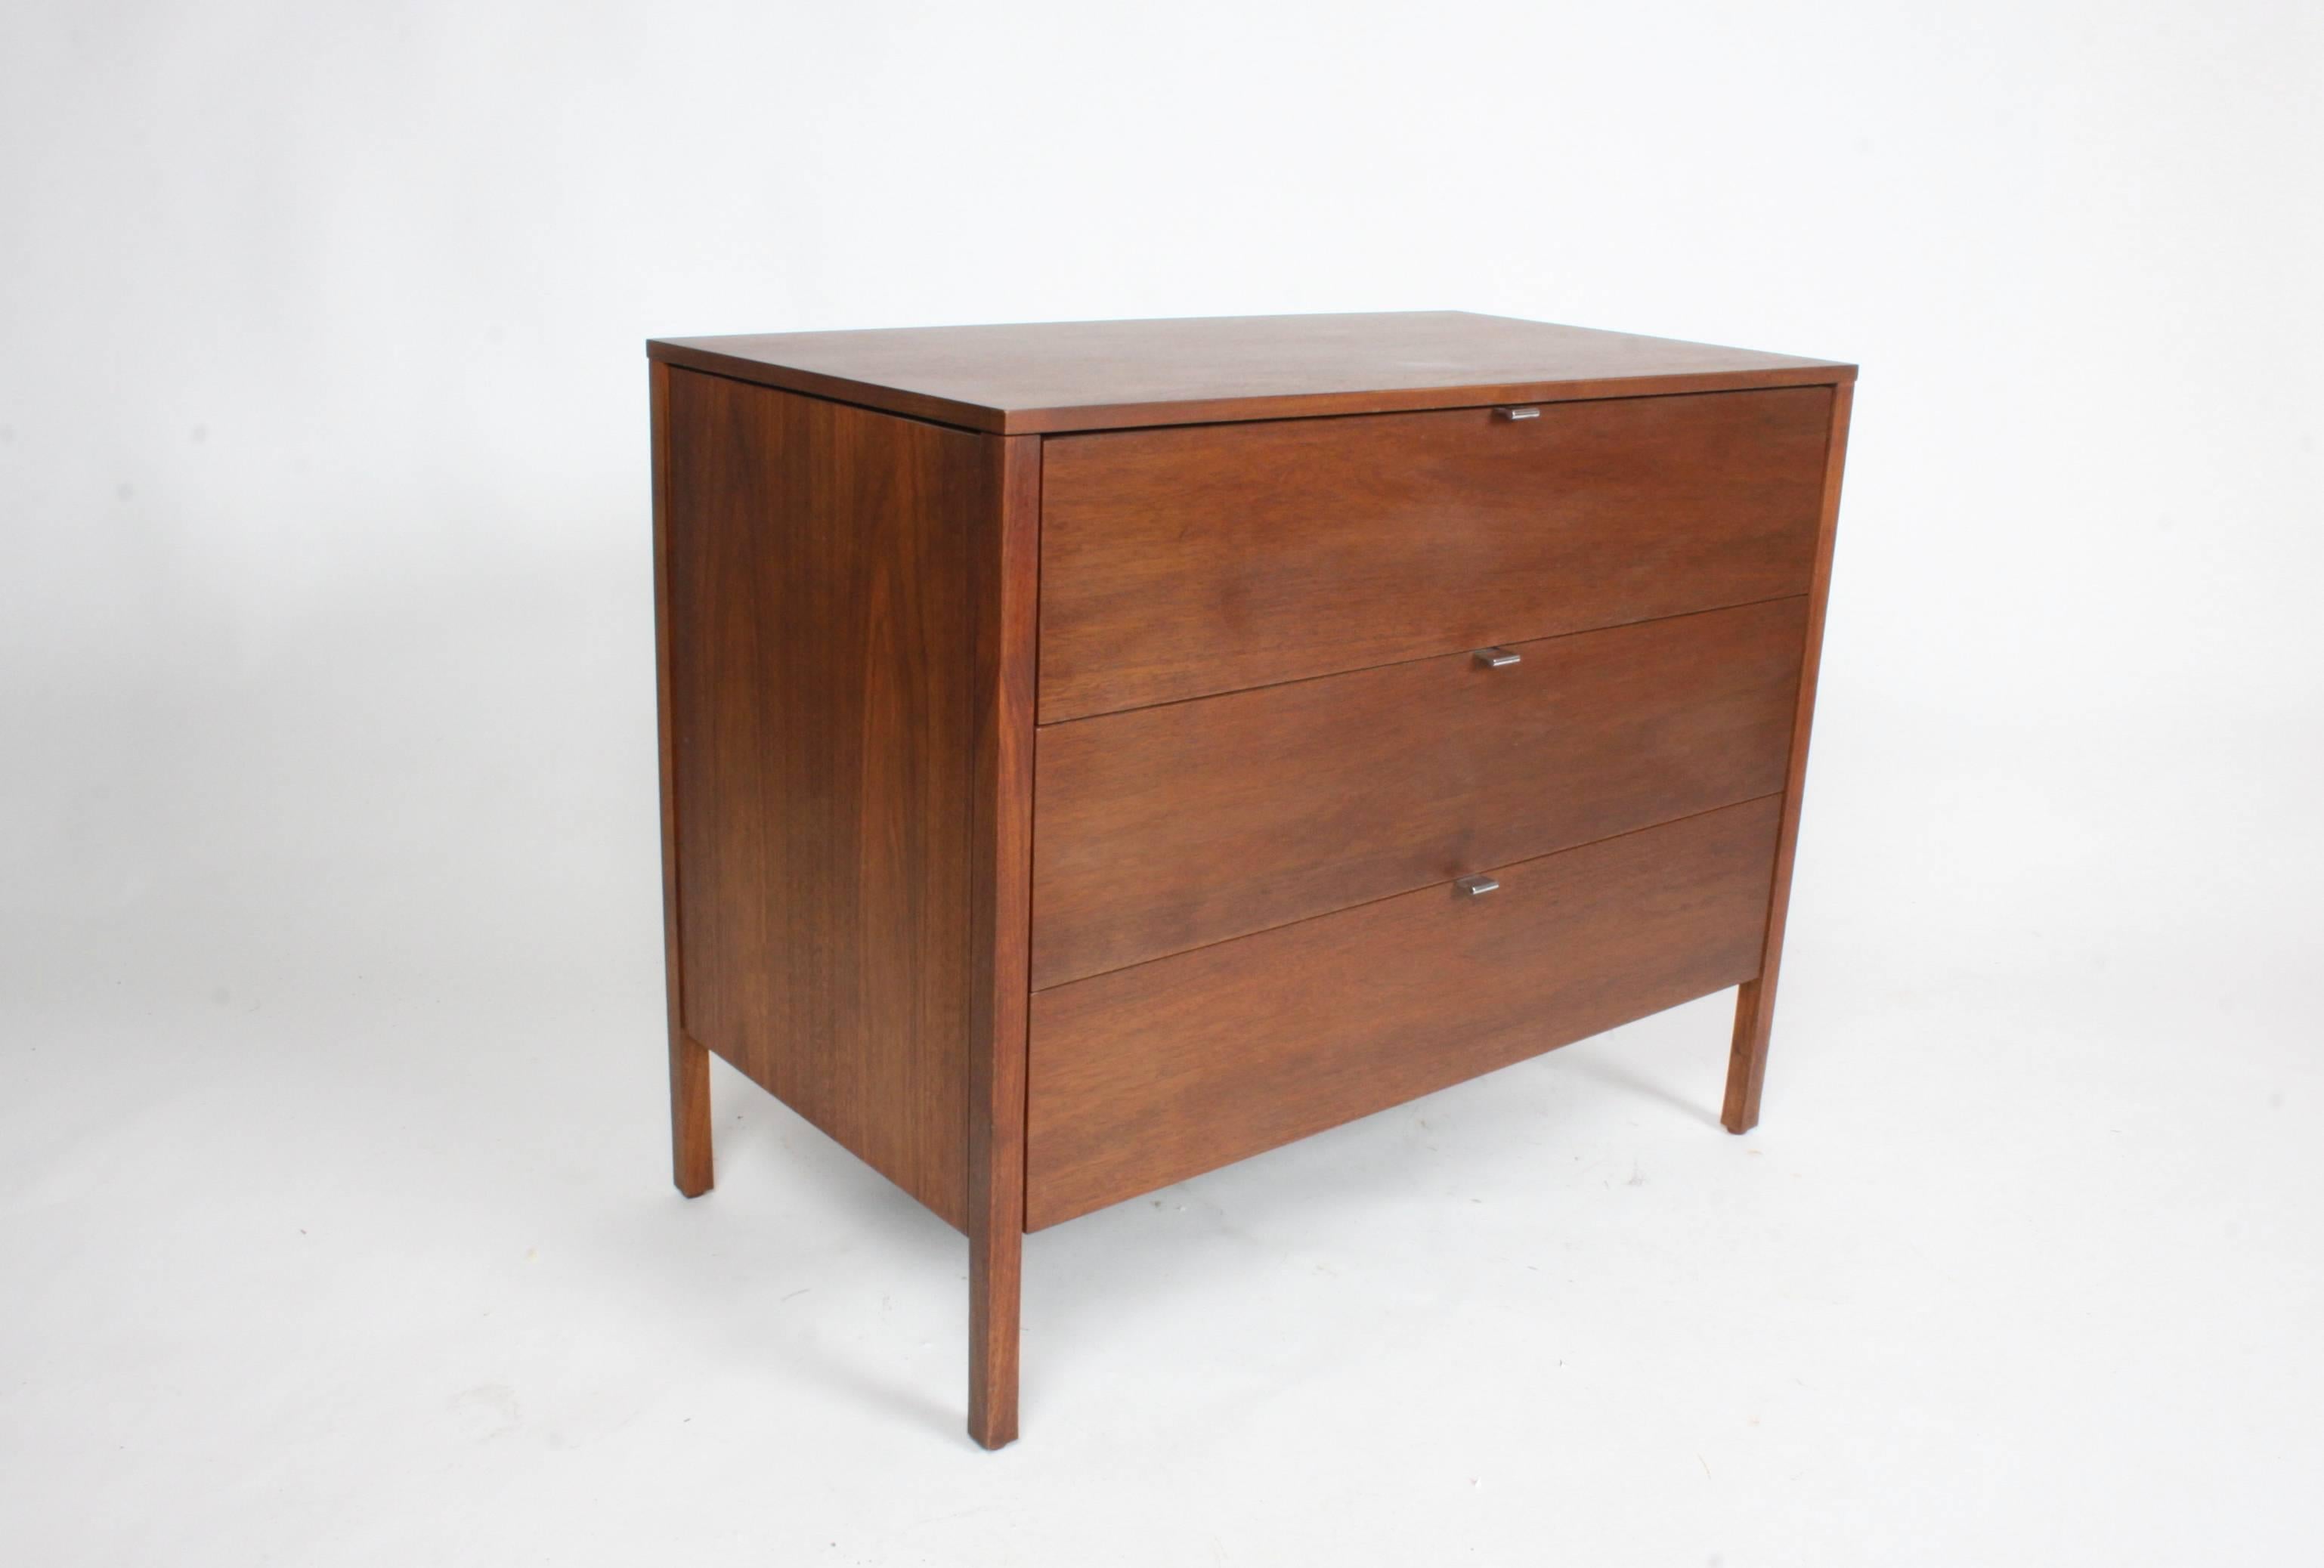 Pair of early walnut Florence Knoll chests or nightstands. Comes with third middle section that forms a dresser vanity or desk. Early label. Tops have been refinished, cabinets have restored original finish. The overall width including middle